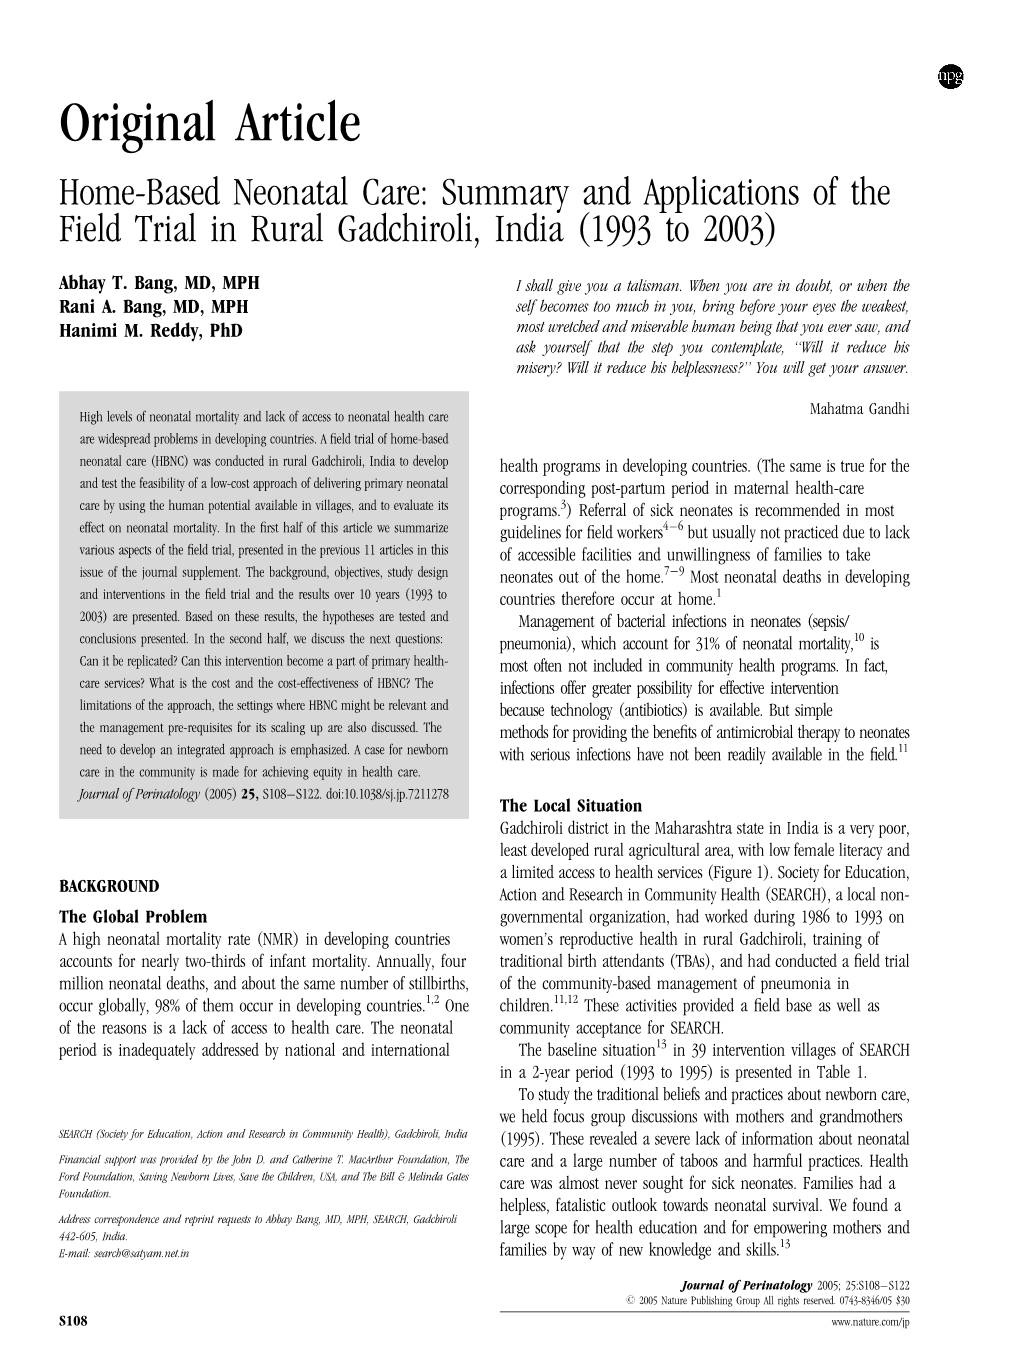 Home-Based Neonatal Care: Summary and Applications of the Field Trial in Rural Gadchiroli, India (1993 to 2003)